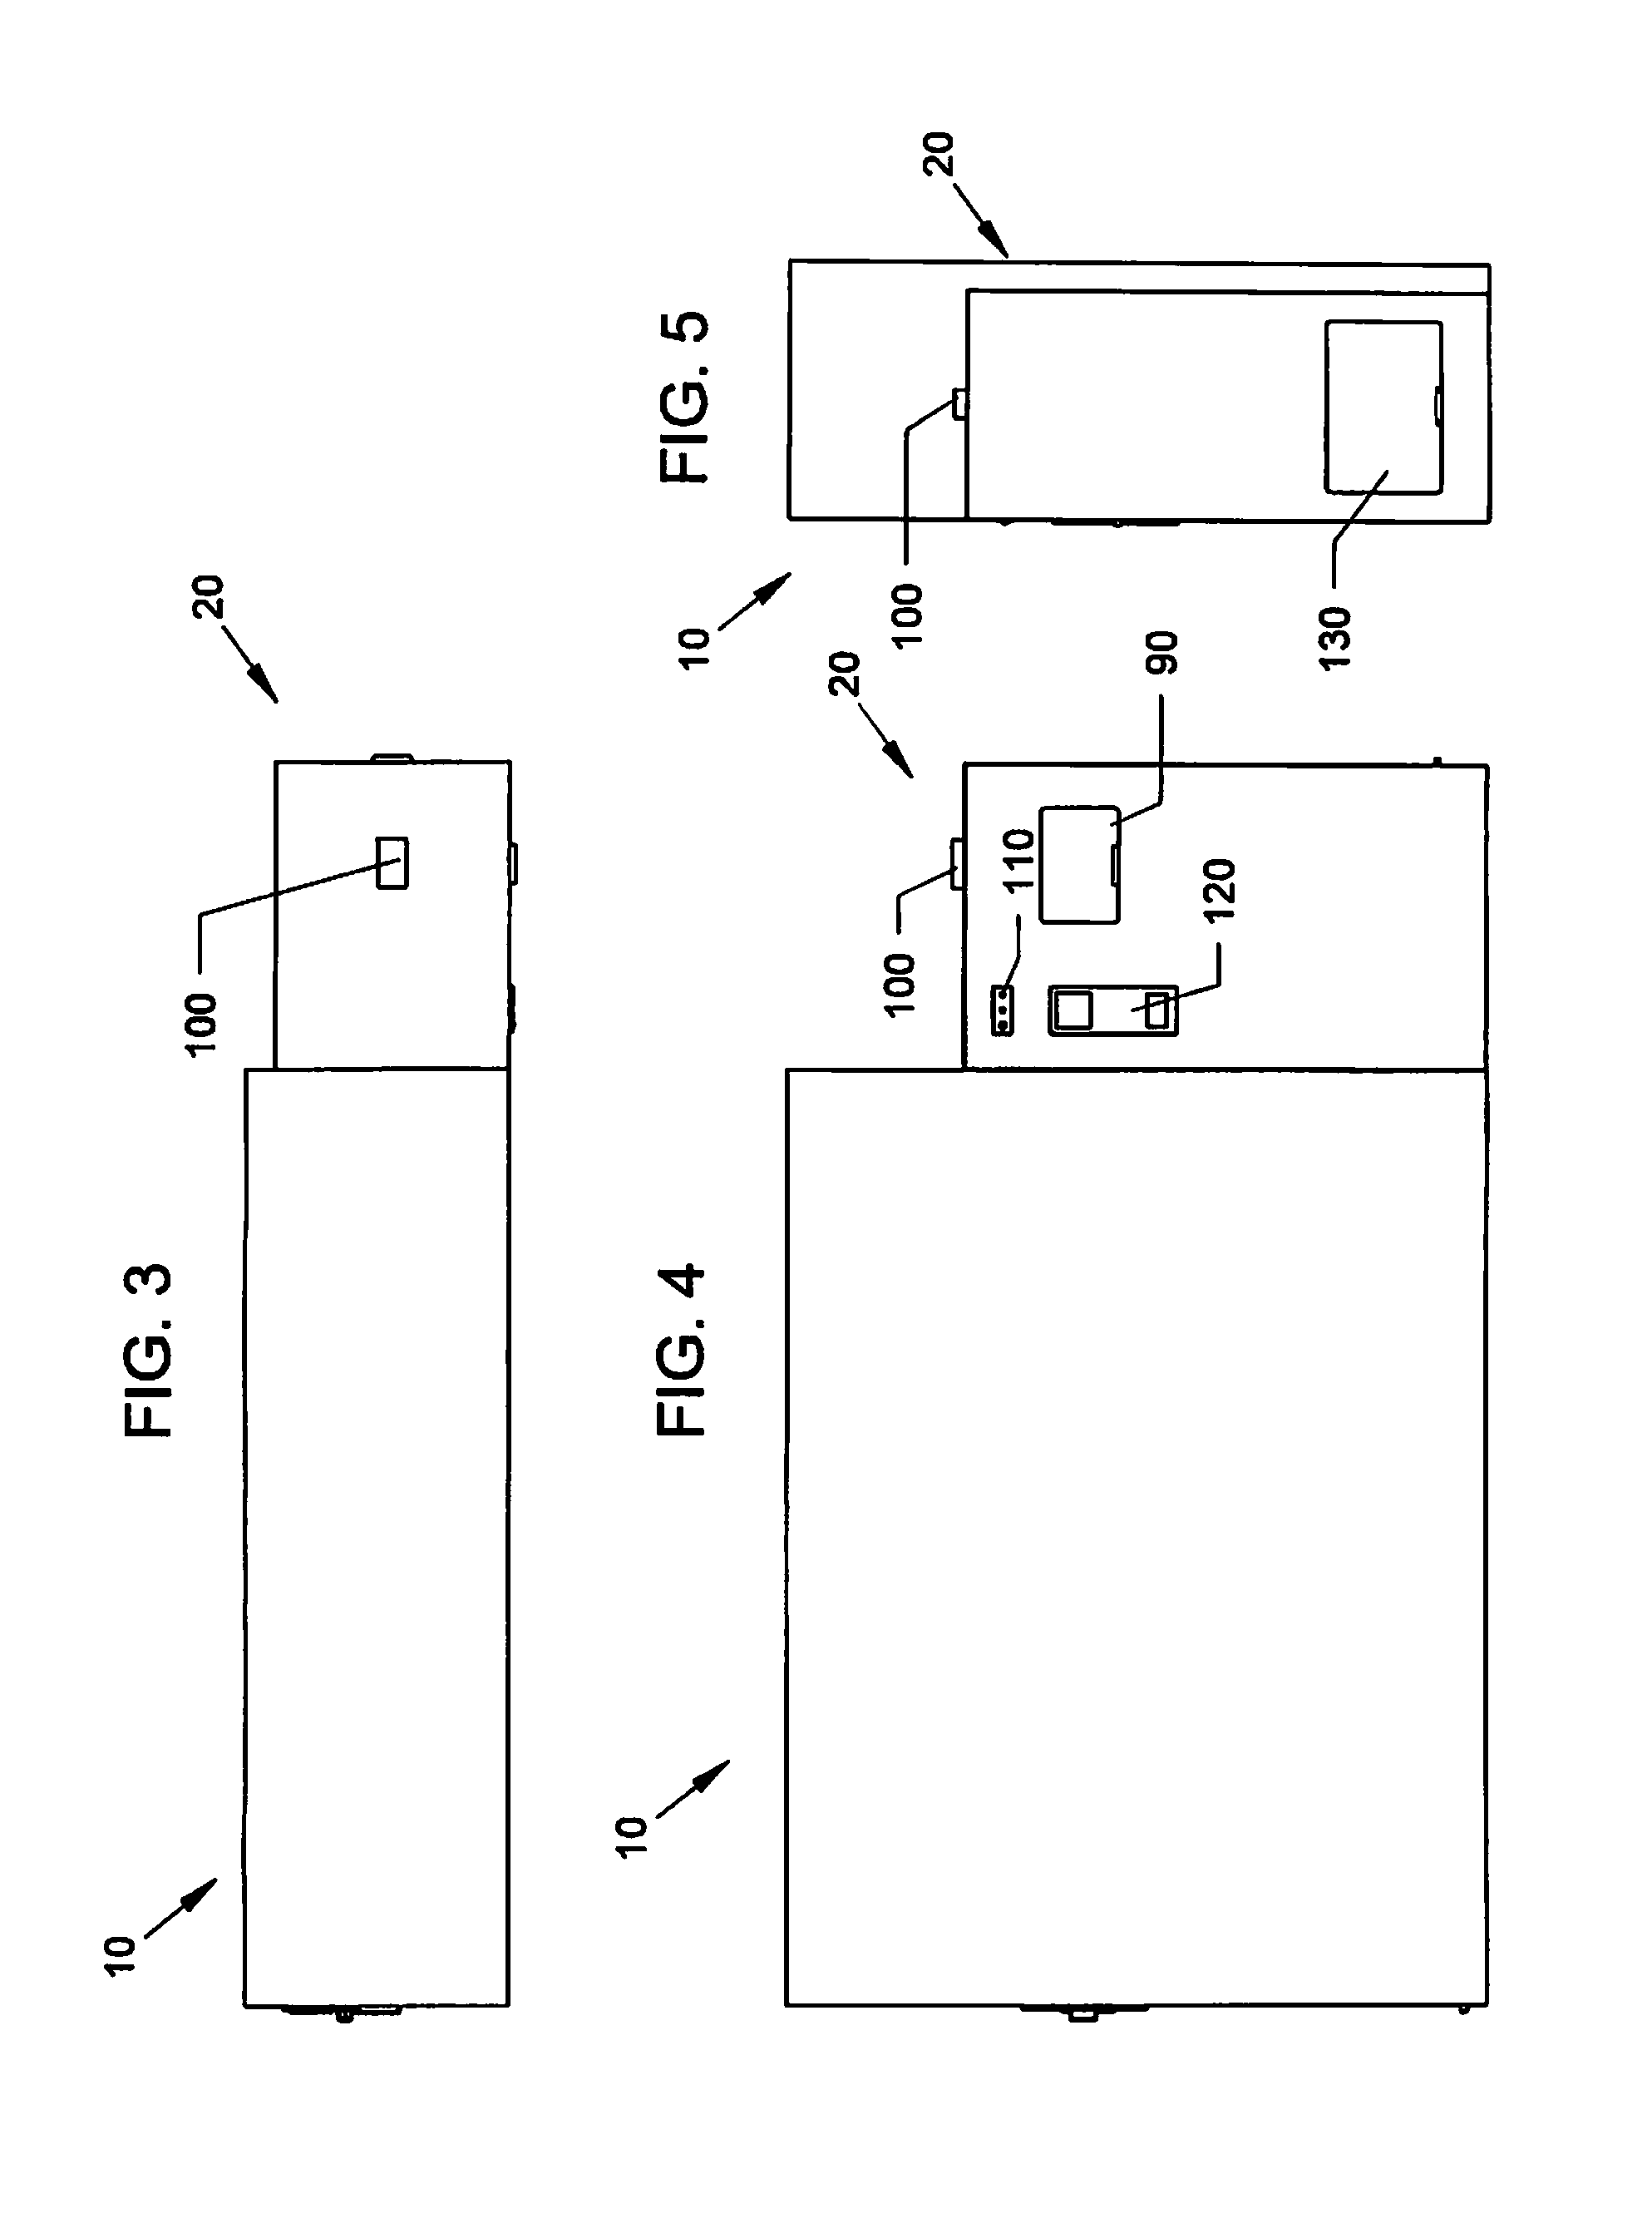 Vending system with recyclable packaging having automated deposit and return